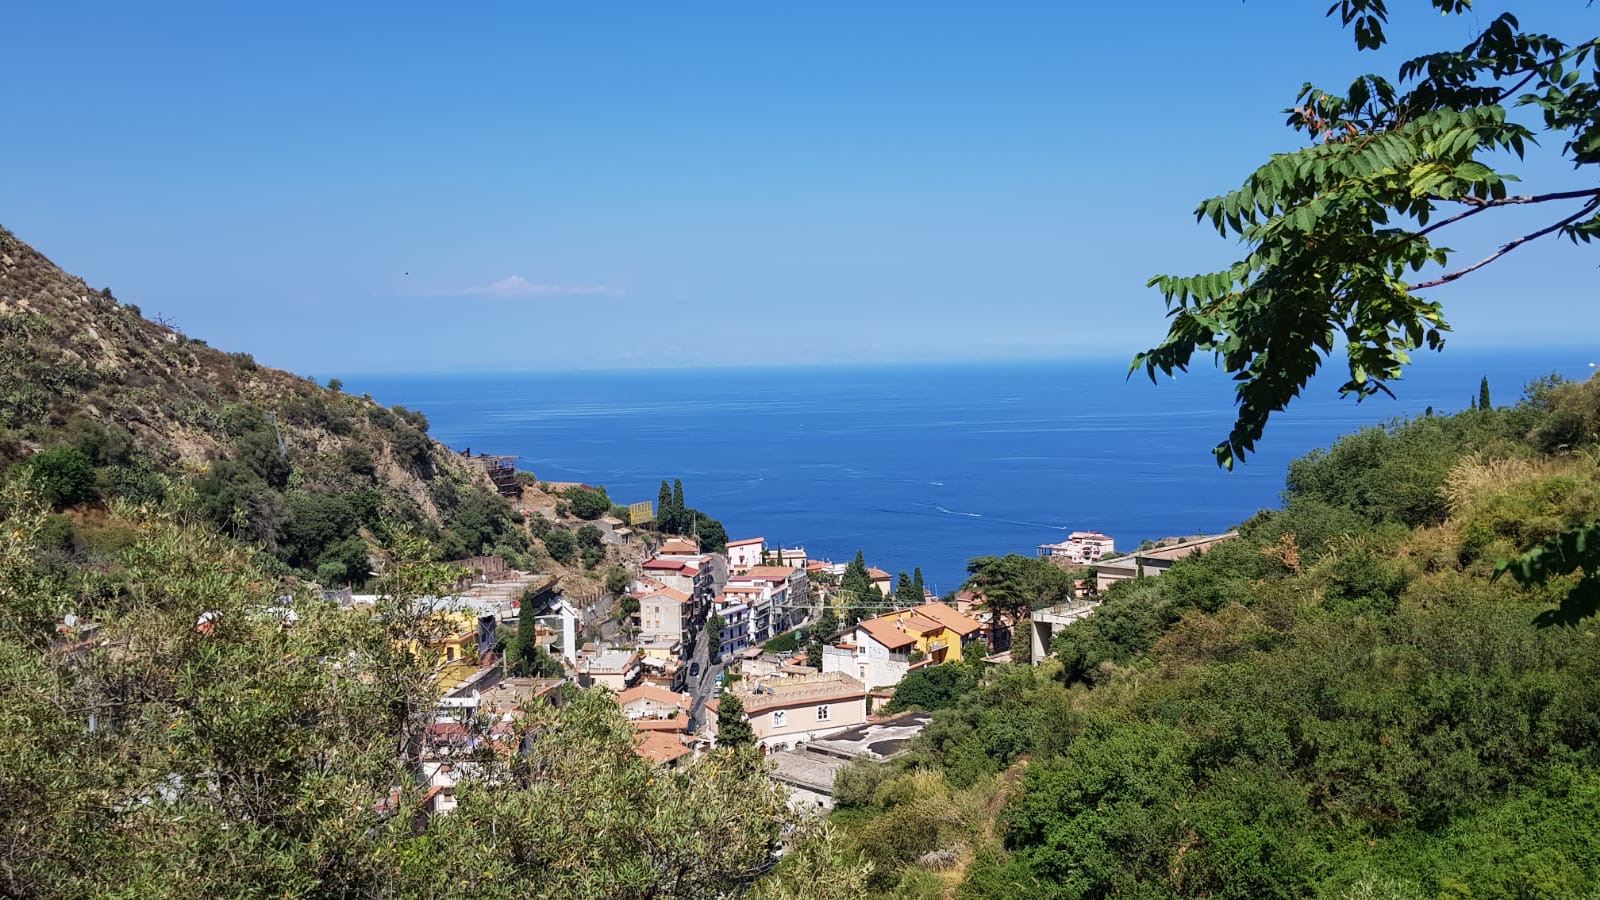 View from Taormina, Sicily.